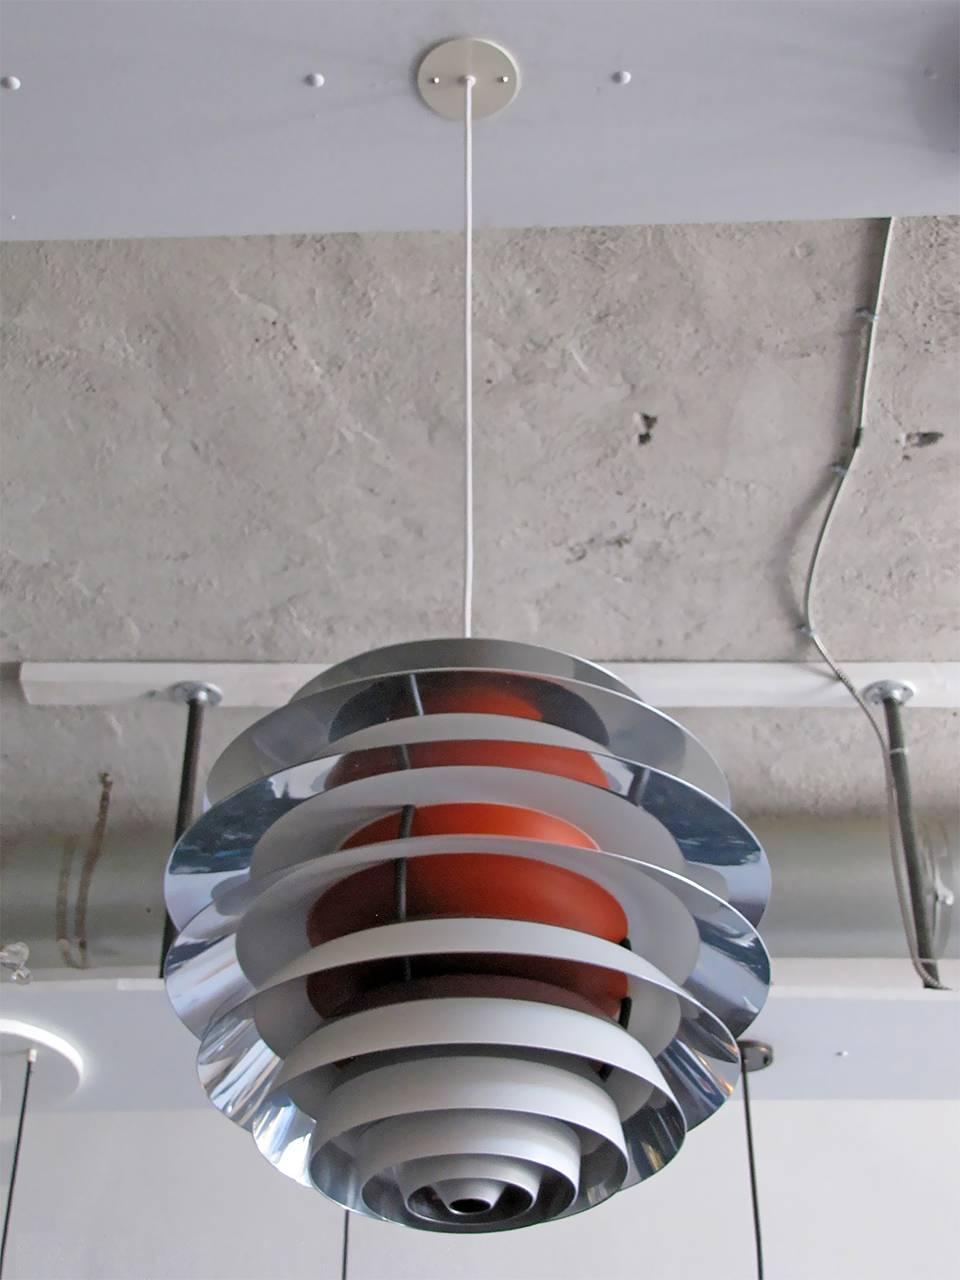 Stunning Poul Henningsen "Kontrast" lamp in excellent original condition.
Pendant is composed of ten concentric, stacked rings in orange, off-white
and polished aluminum that produce a wonderful, glare-free light.